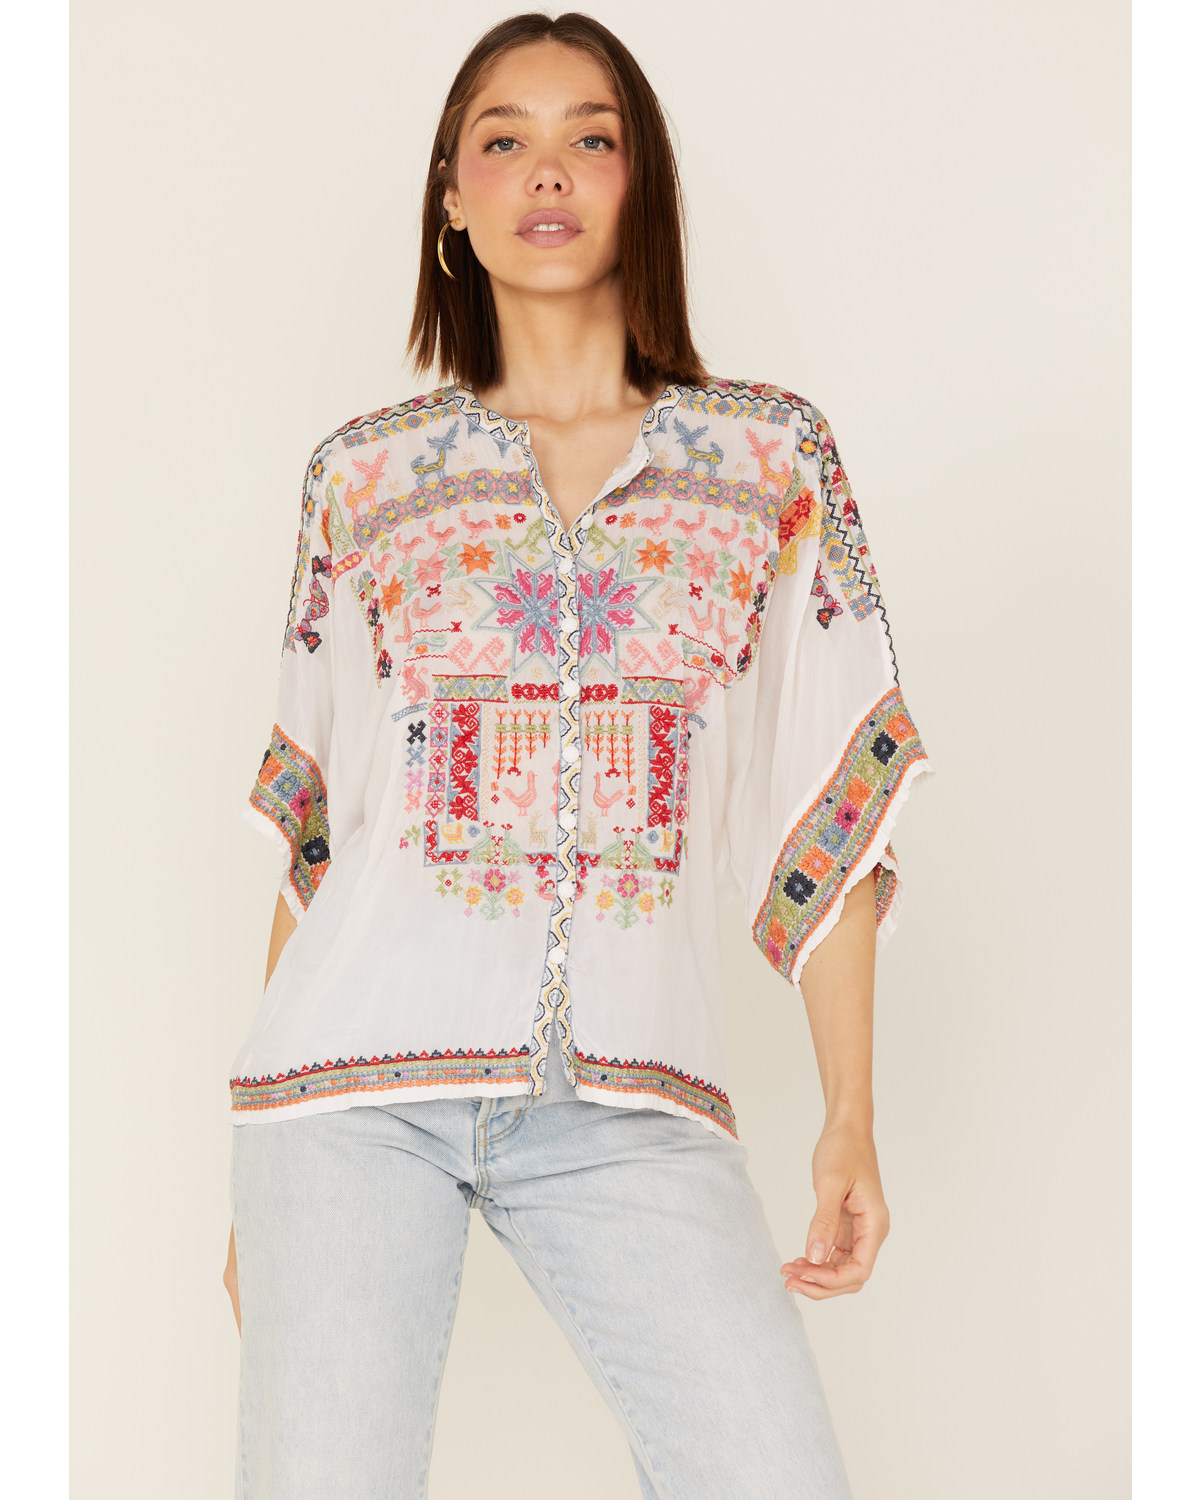 Johnny Was Women's Xylia Embroidered Wildlife & Floral Short Sleeve Blouse